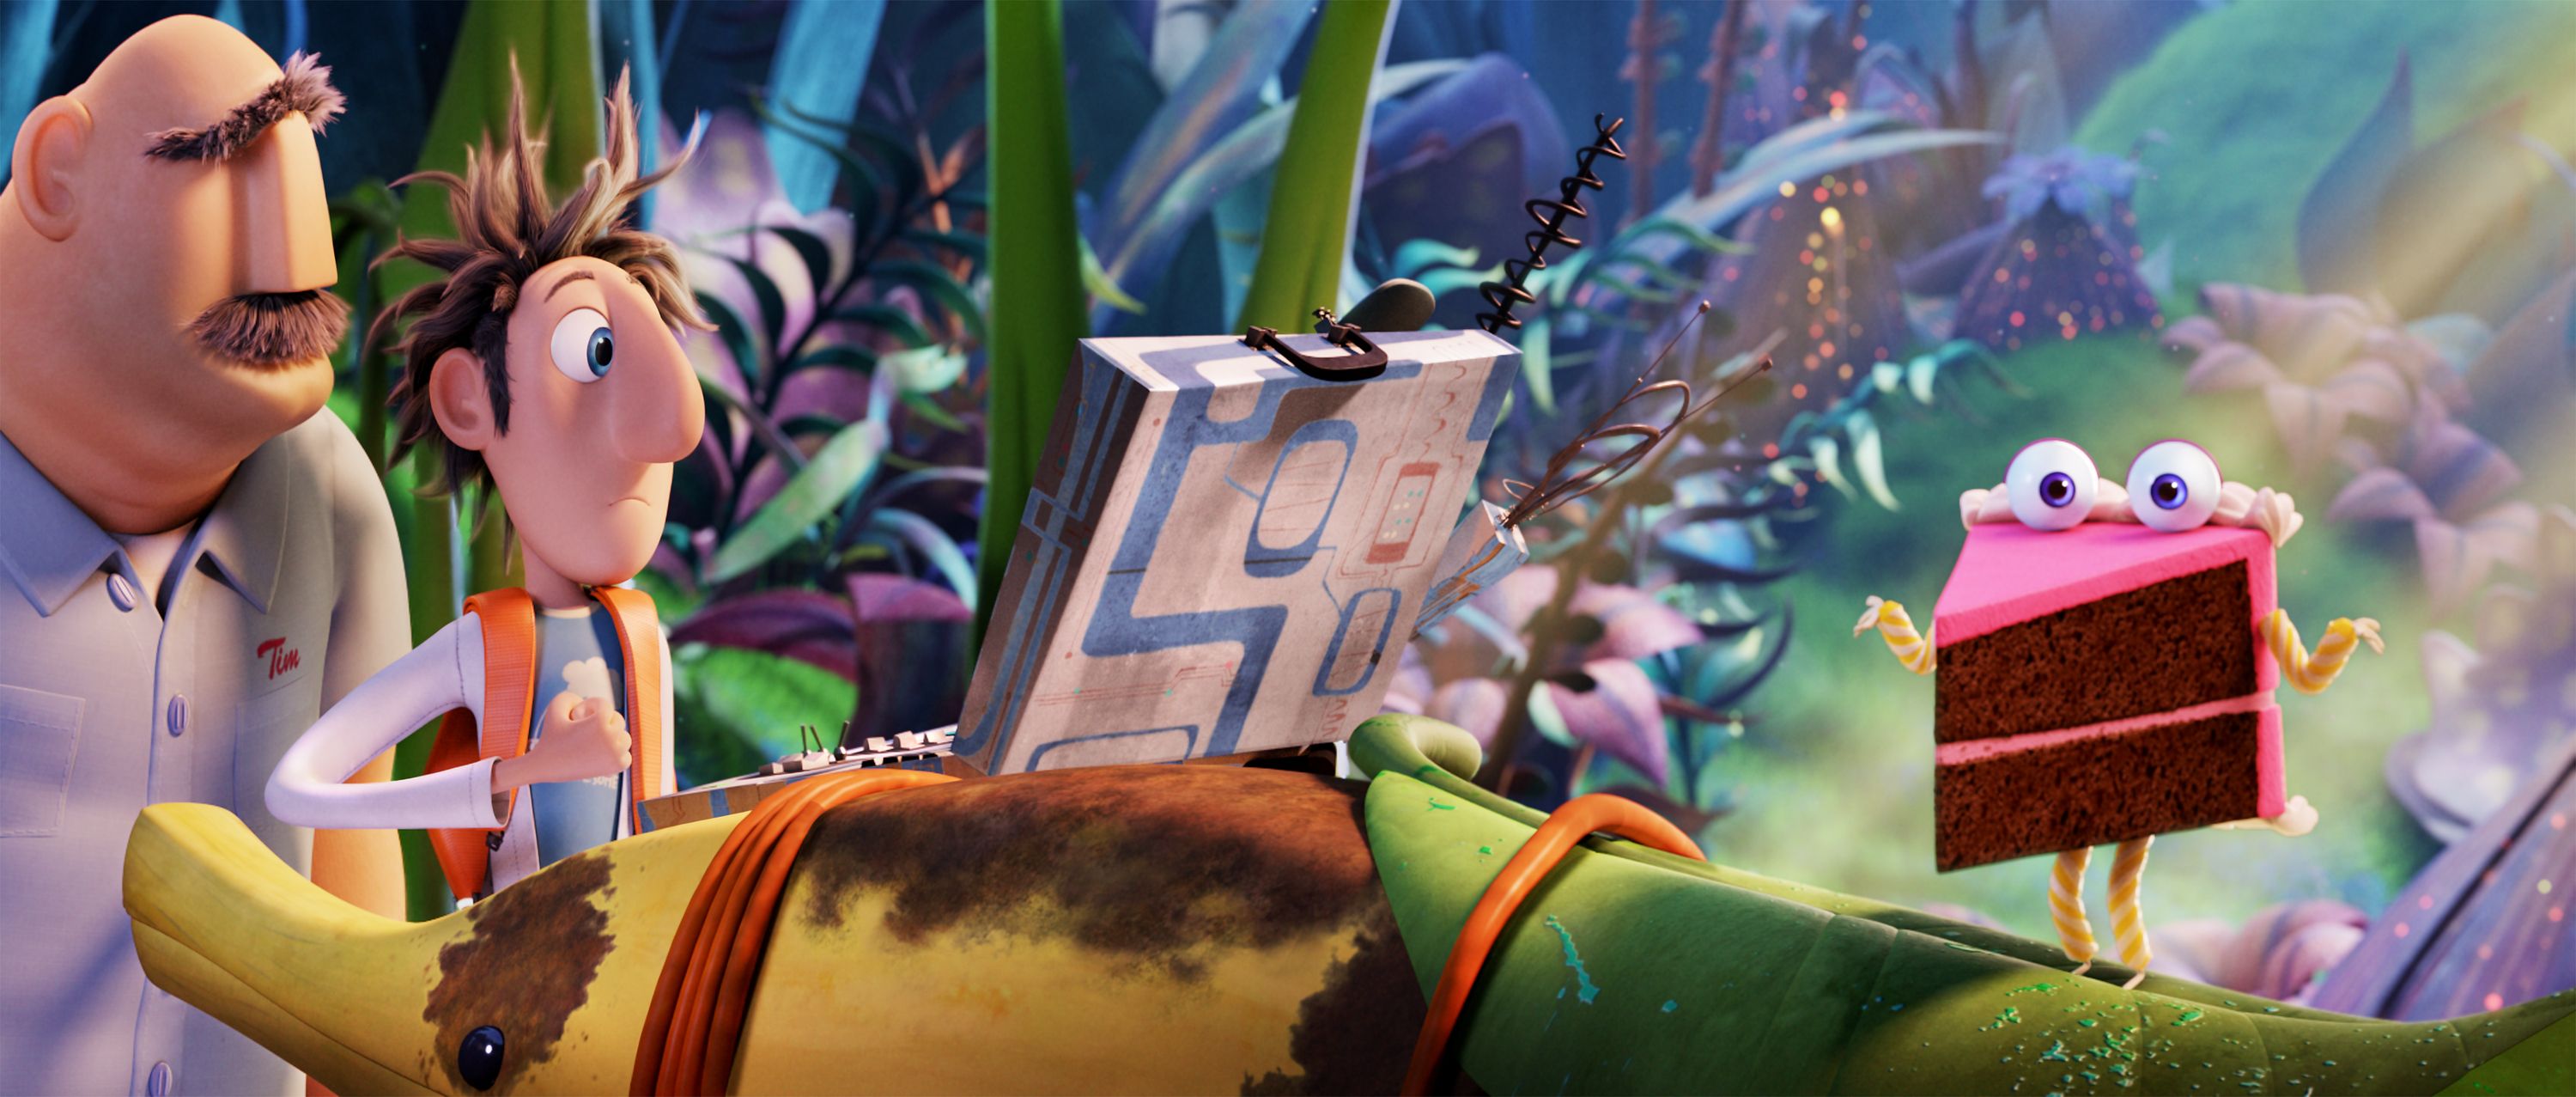 Cloudy with a Chance of Meatballs 2 Photo 10